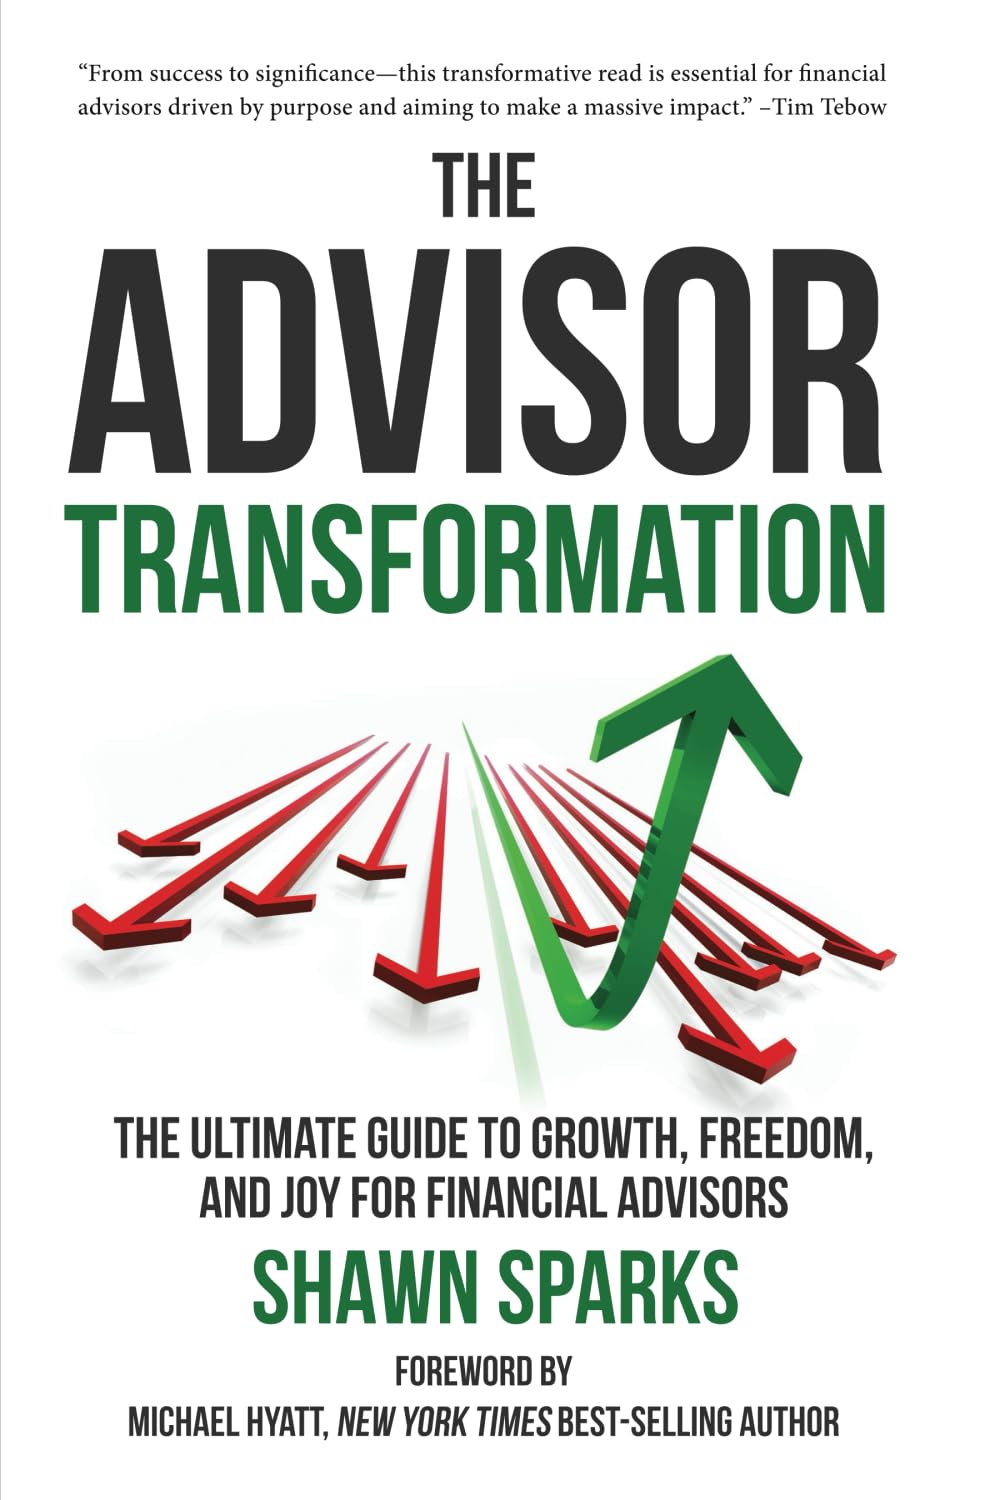 The Advisor Transformation: The Ultimate Guide To Growth, Freedom, And Joy For Financial Advisors